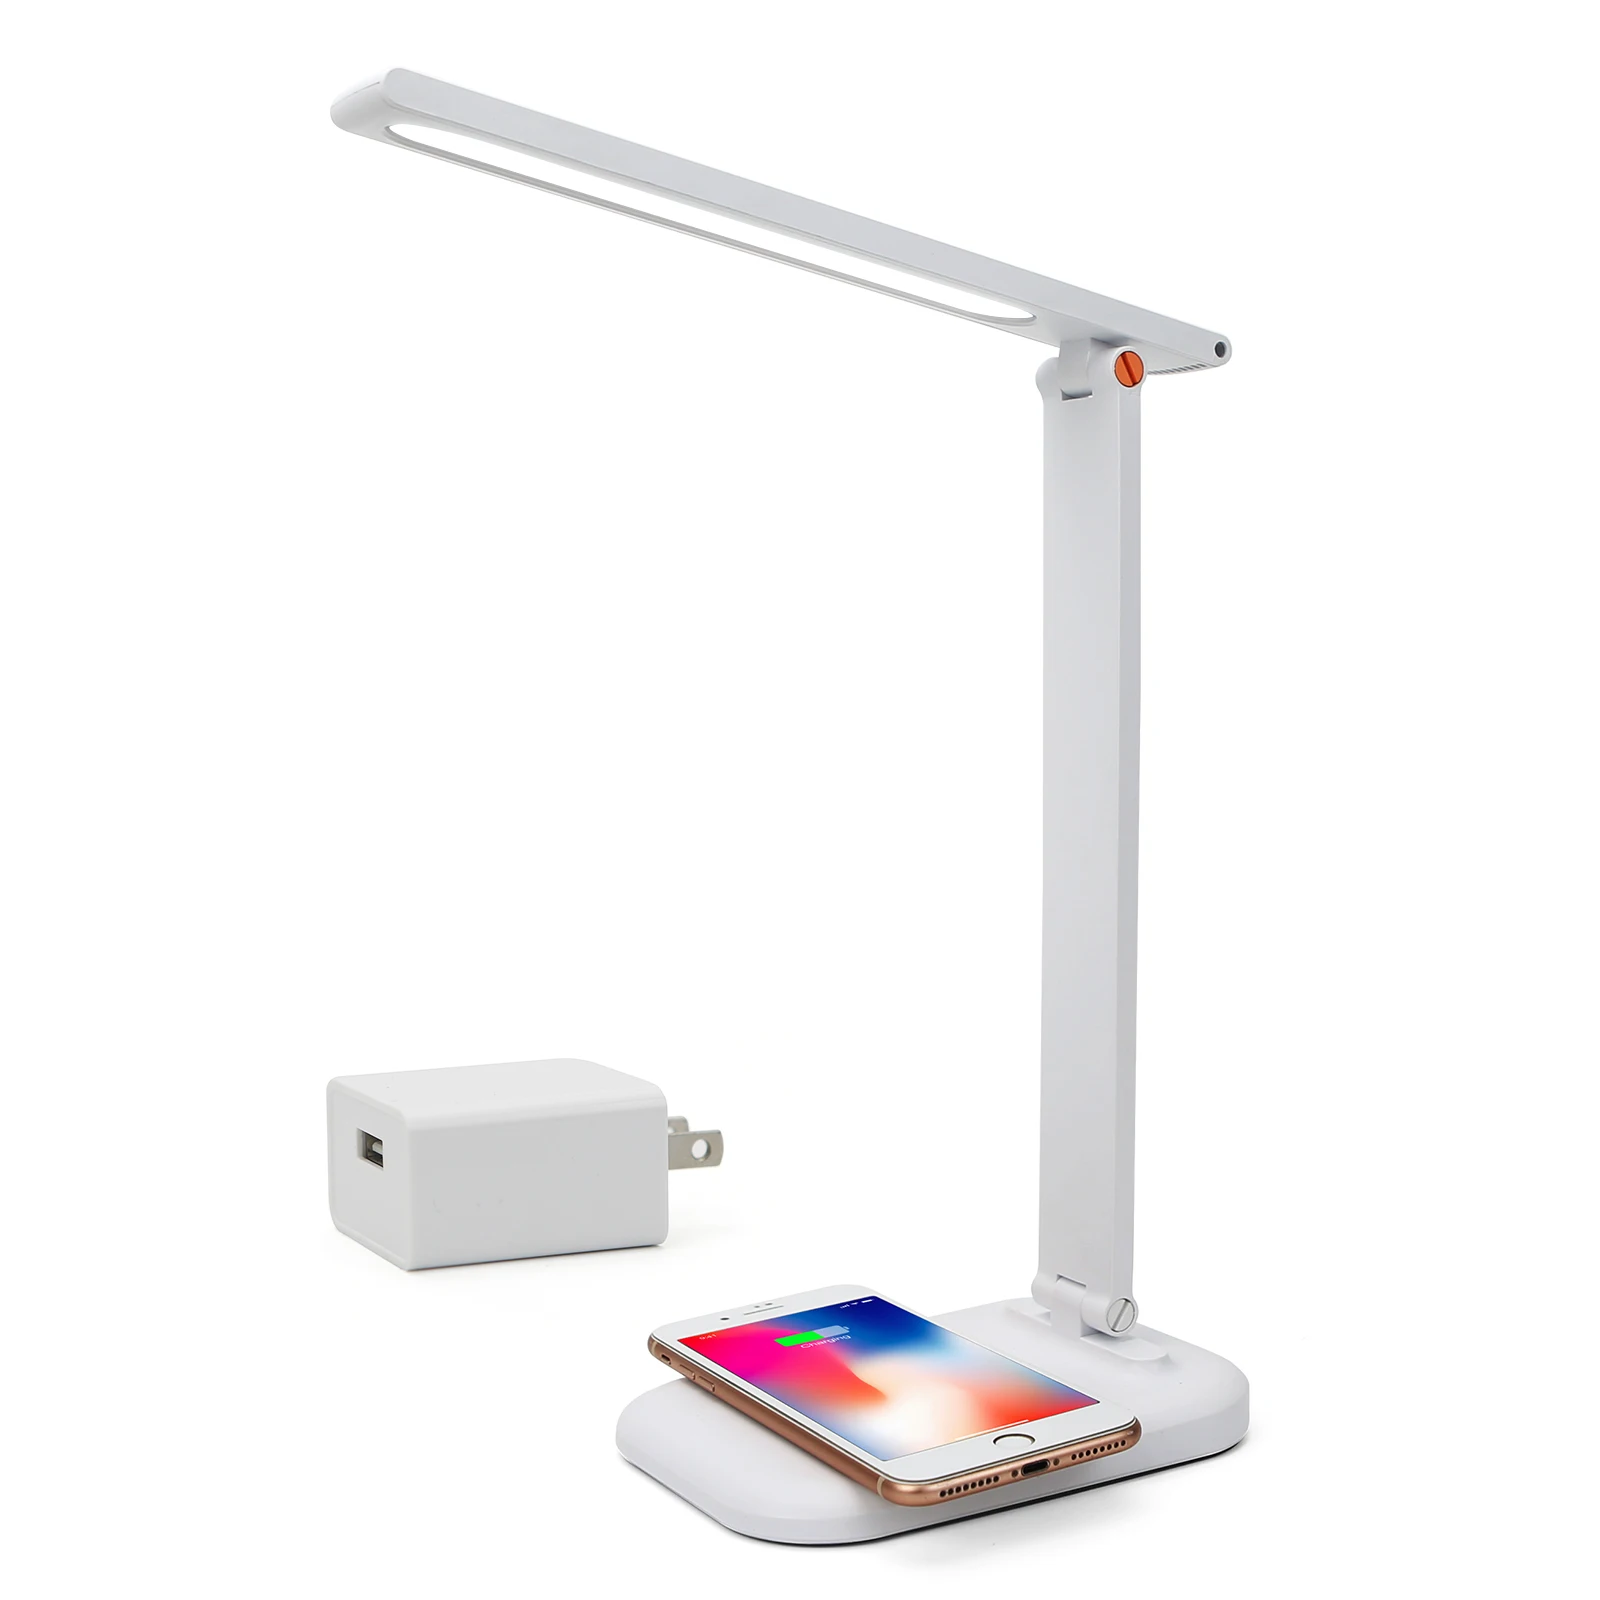 LED Desk Lamp with Wireless Charger,Dimmable Eye-Caring Office Lamp with Wireless Charging,Desk Light for work/Study/Read